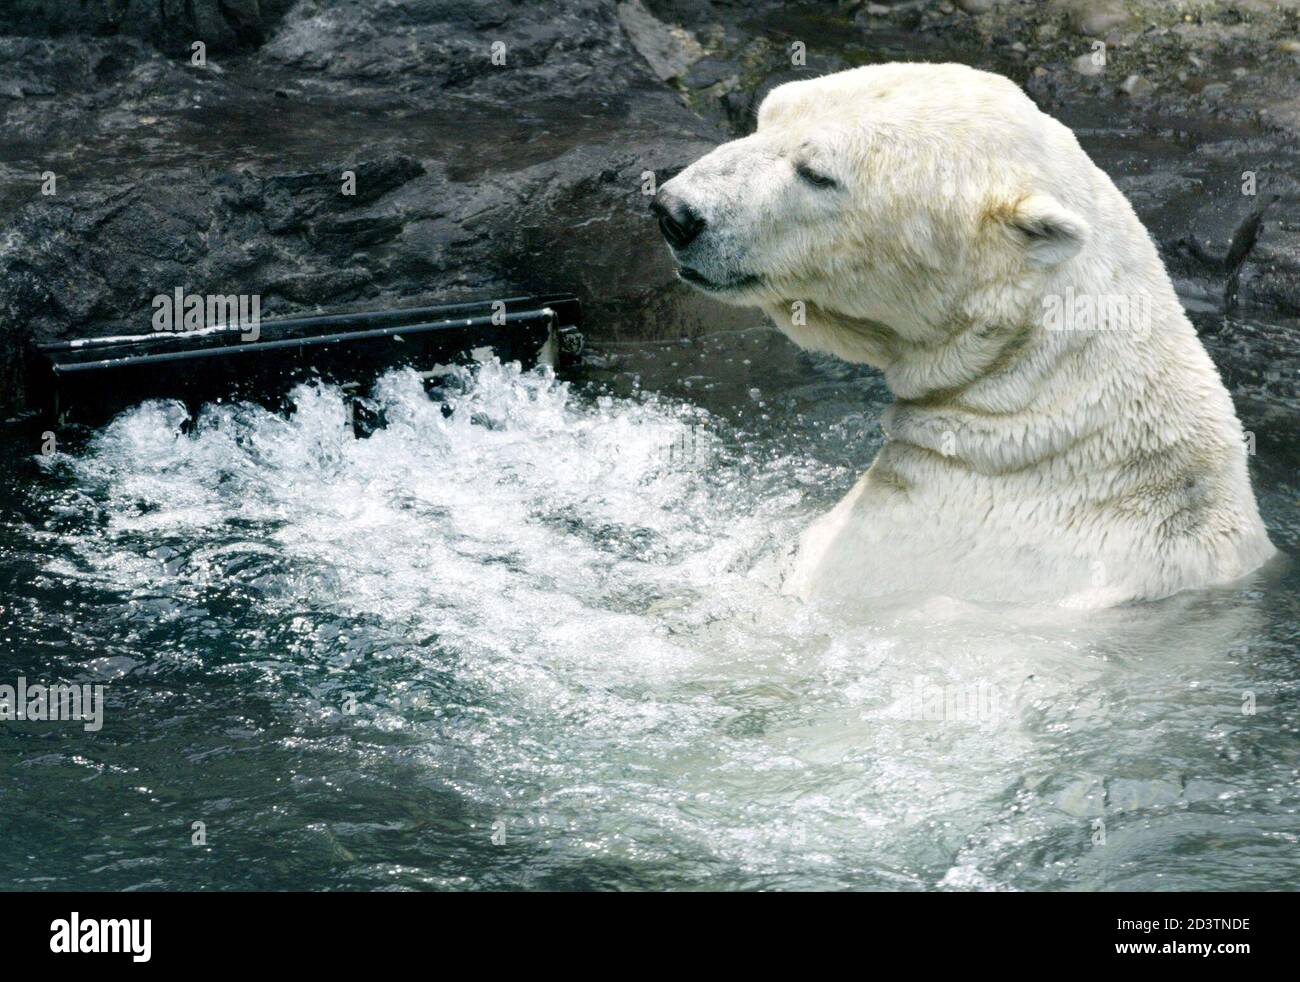 Gus, a 17-year-old polar bear, frolics near the vent of a water circulation system called 'endless pool,' which simulates a natural current, in the polar bear exhibit at the Central Park Zoo in New York, July 1, 2002. [The temperature was 87 degrees Fahrenheit (31 degrees Celsius) in the city and expected to reach the nineties by midweek.] Stock Photo